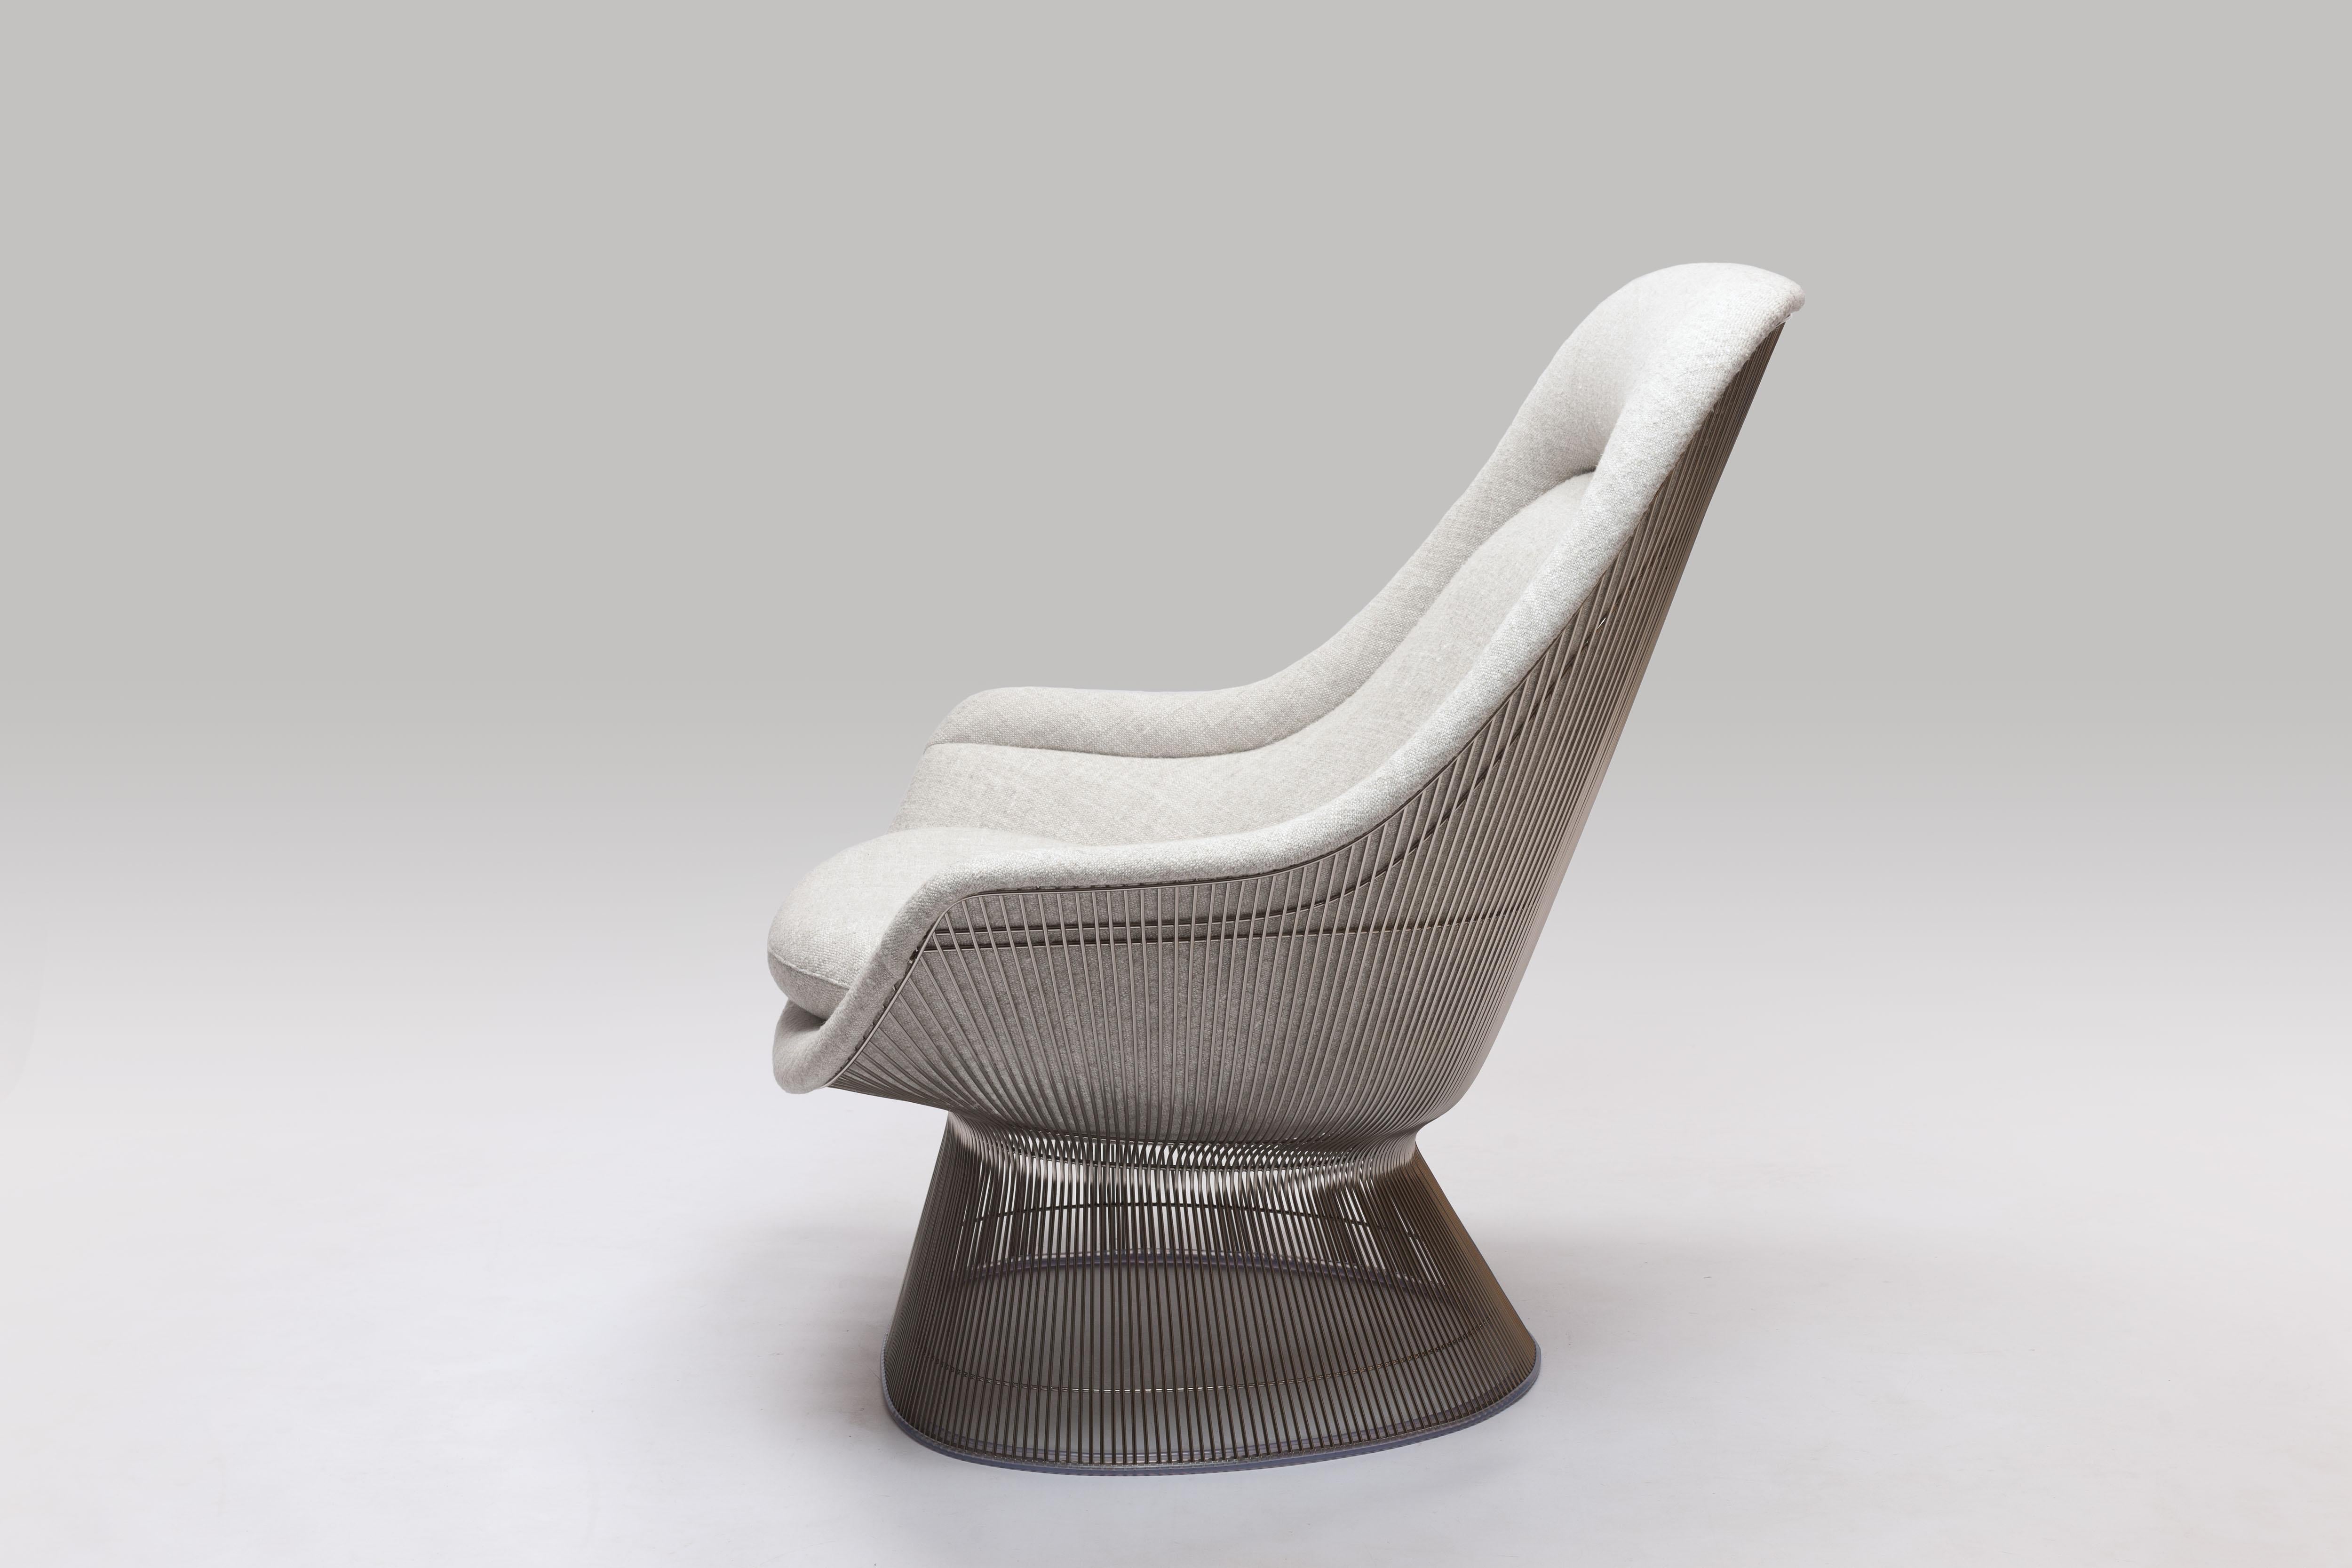 Sculptural and graceful iconic lounge chair model 1705 by Warren Platner designed in 1962 for Knoll International. Nickel-plated steel wire frame executed from steel rods and extensive amounts of welds, upholstered in luxury (expensive) Knoll fabric